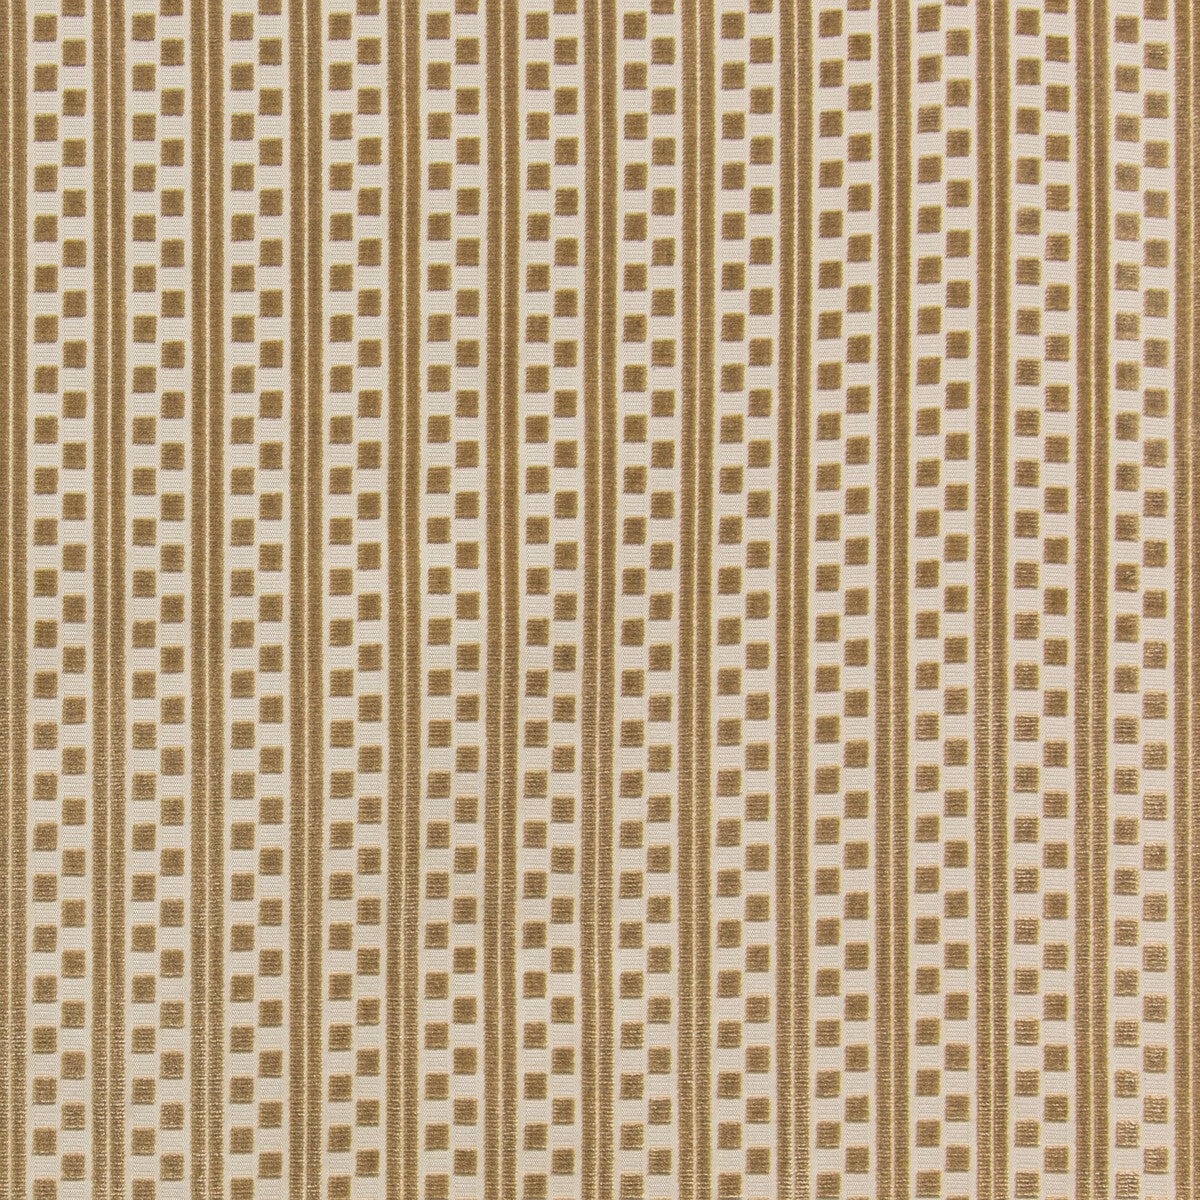 Lawrence Velvet fabric in sand color - pattern 2019121.16.0 - by Lee Jofa in the Harlington Velvets collection